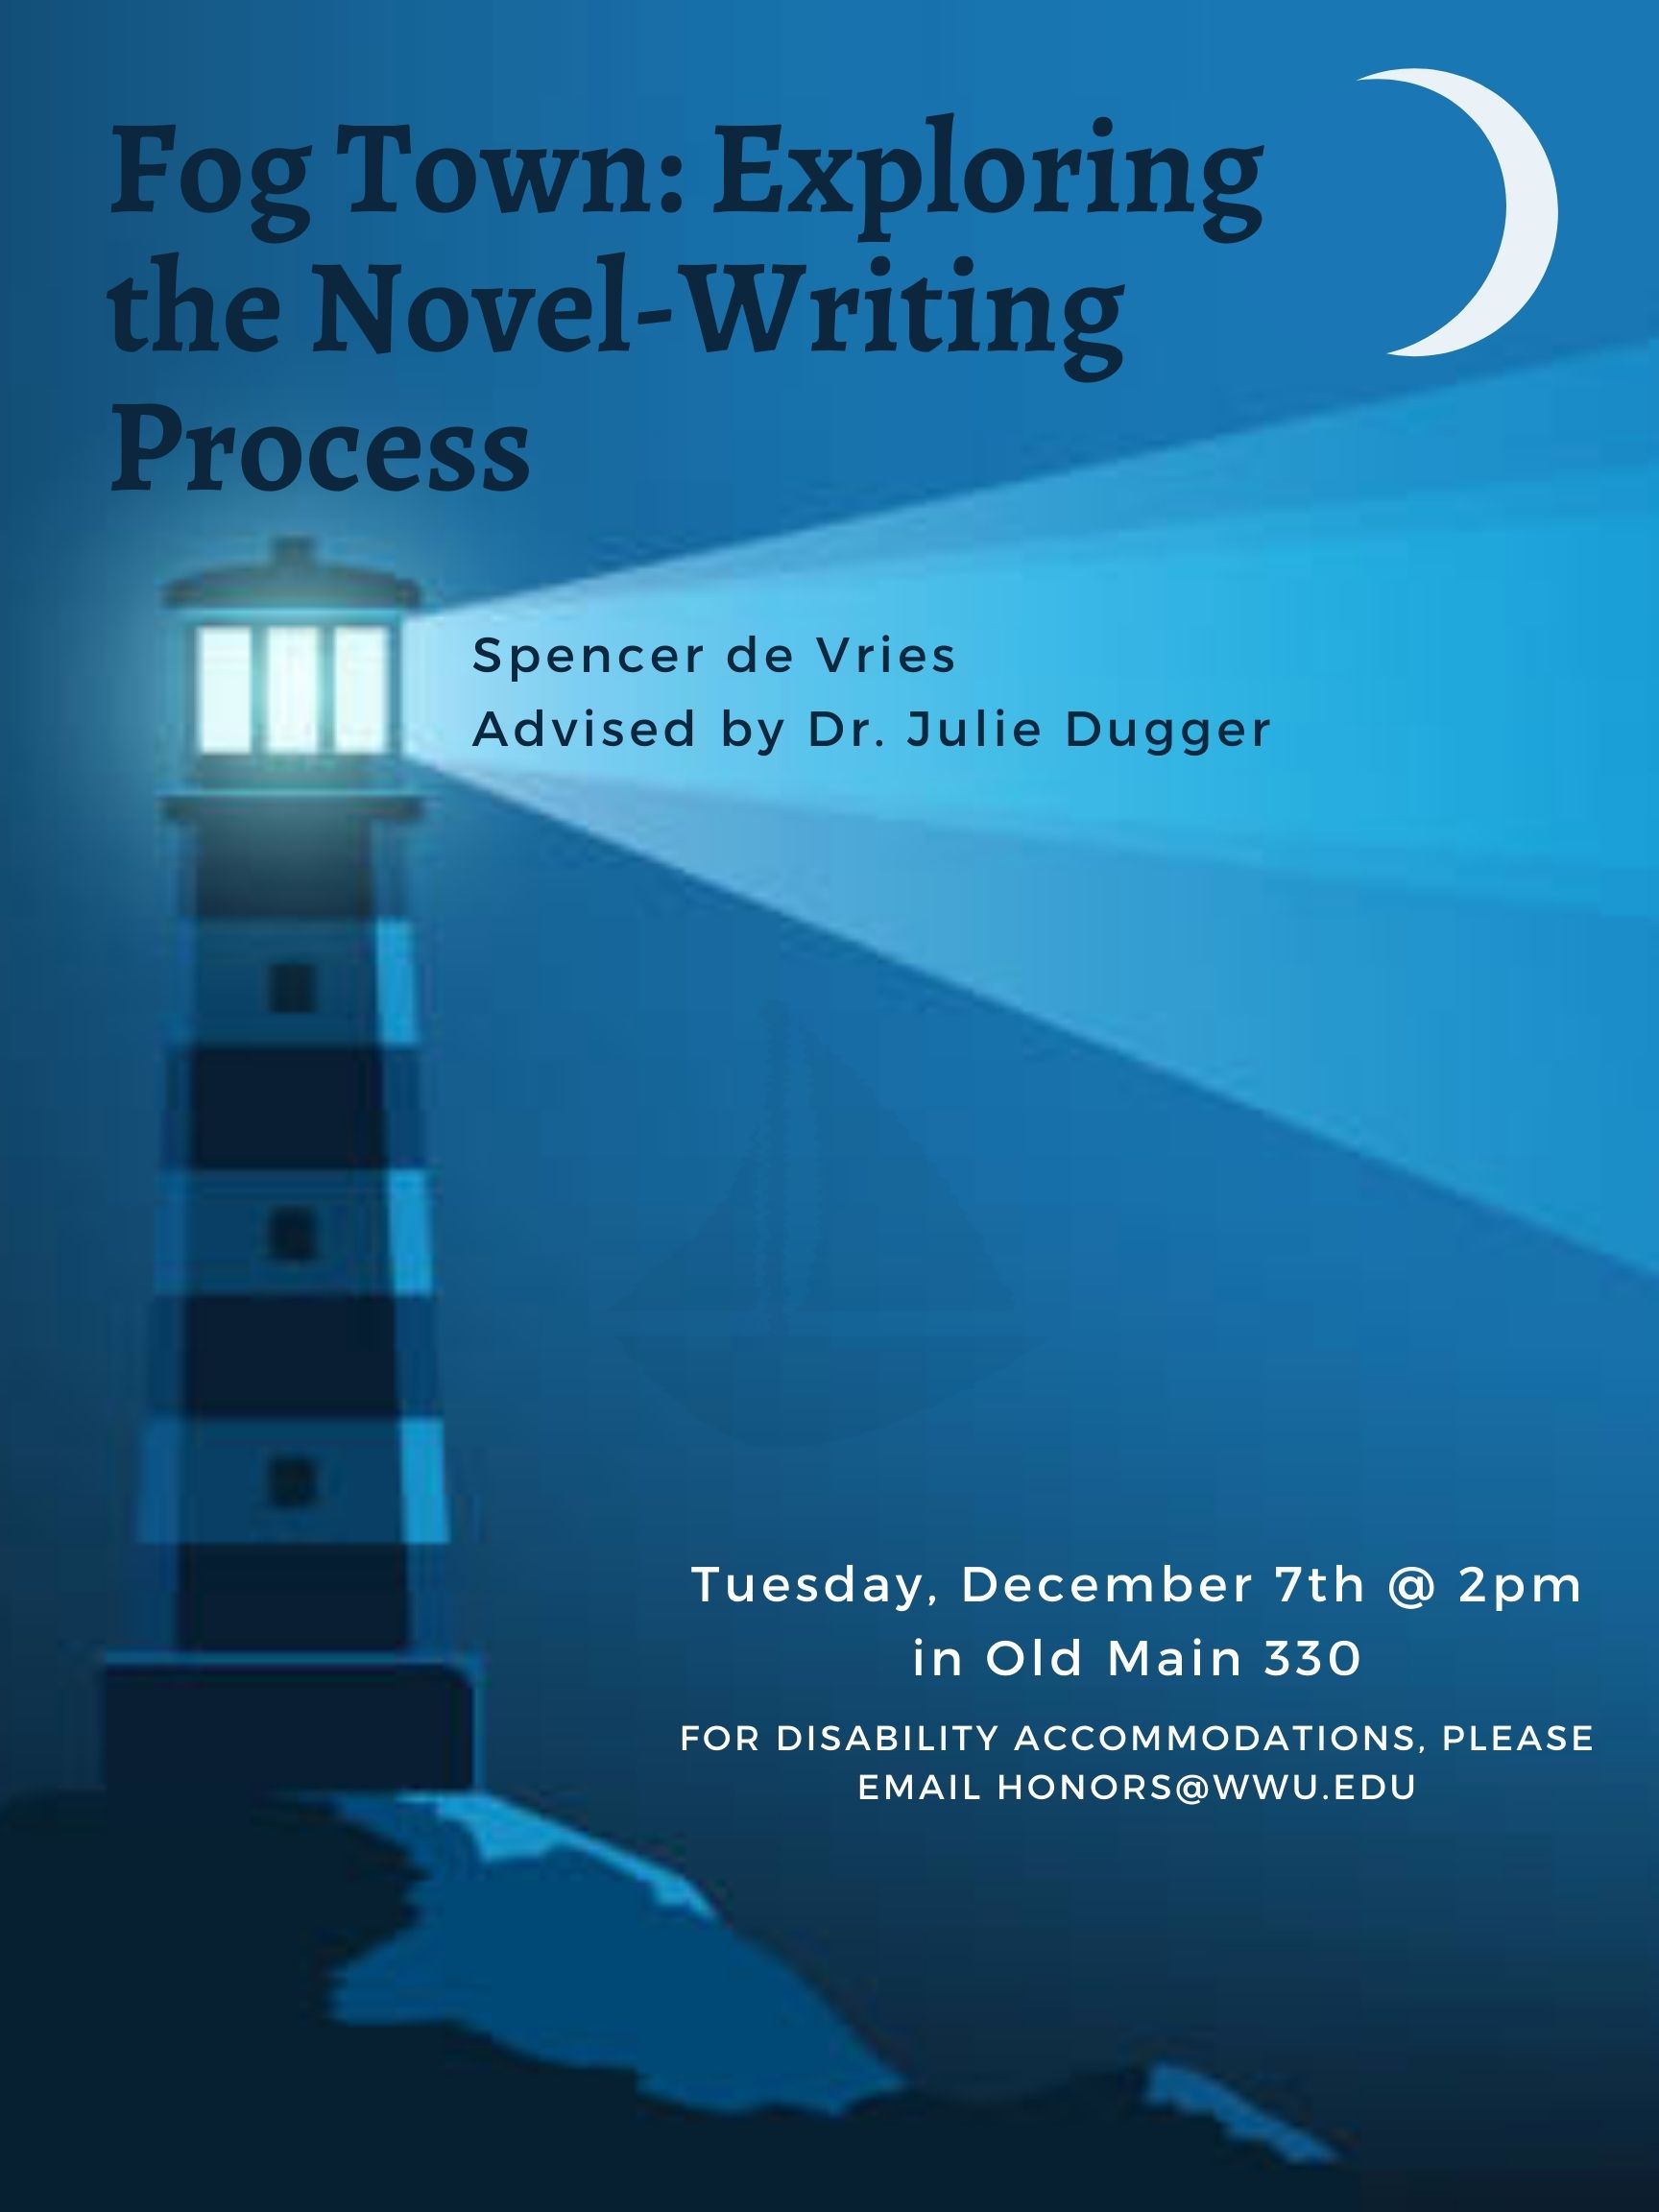 A poster that has a lighthouse and crescent moon in the background. Its title reads "Fog Town: Exploring the Novel-Writing Process" and beneath that is a subheading that says "Spencer de Vries, advised by Dr. Julie Dugger." At the bottom, there is text reading "Tuesday, December 7th @2pm in Old Main 330. For Disability Accommodations please email honors@wwu.edu"